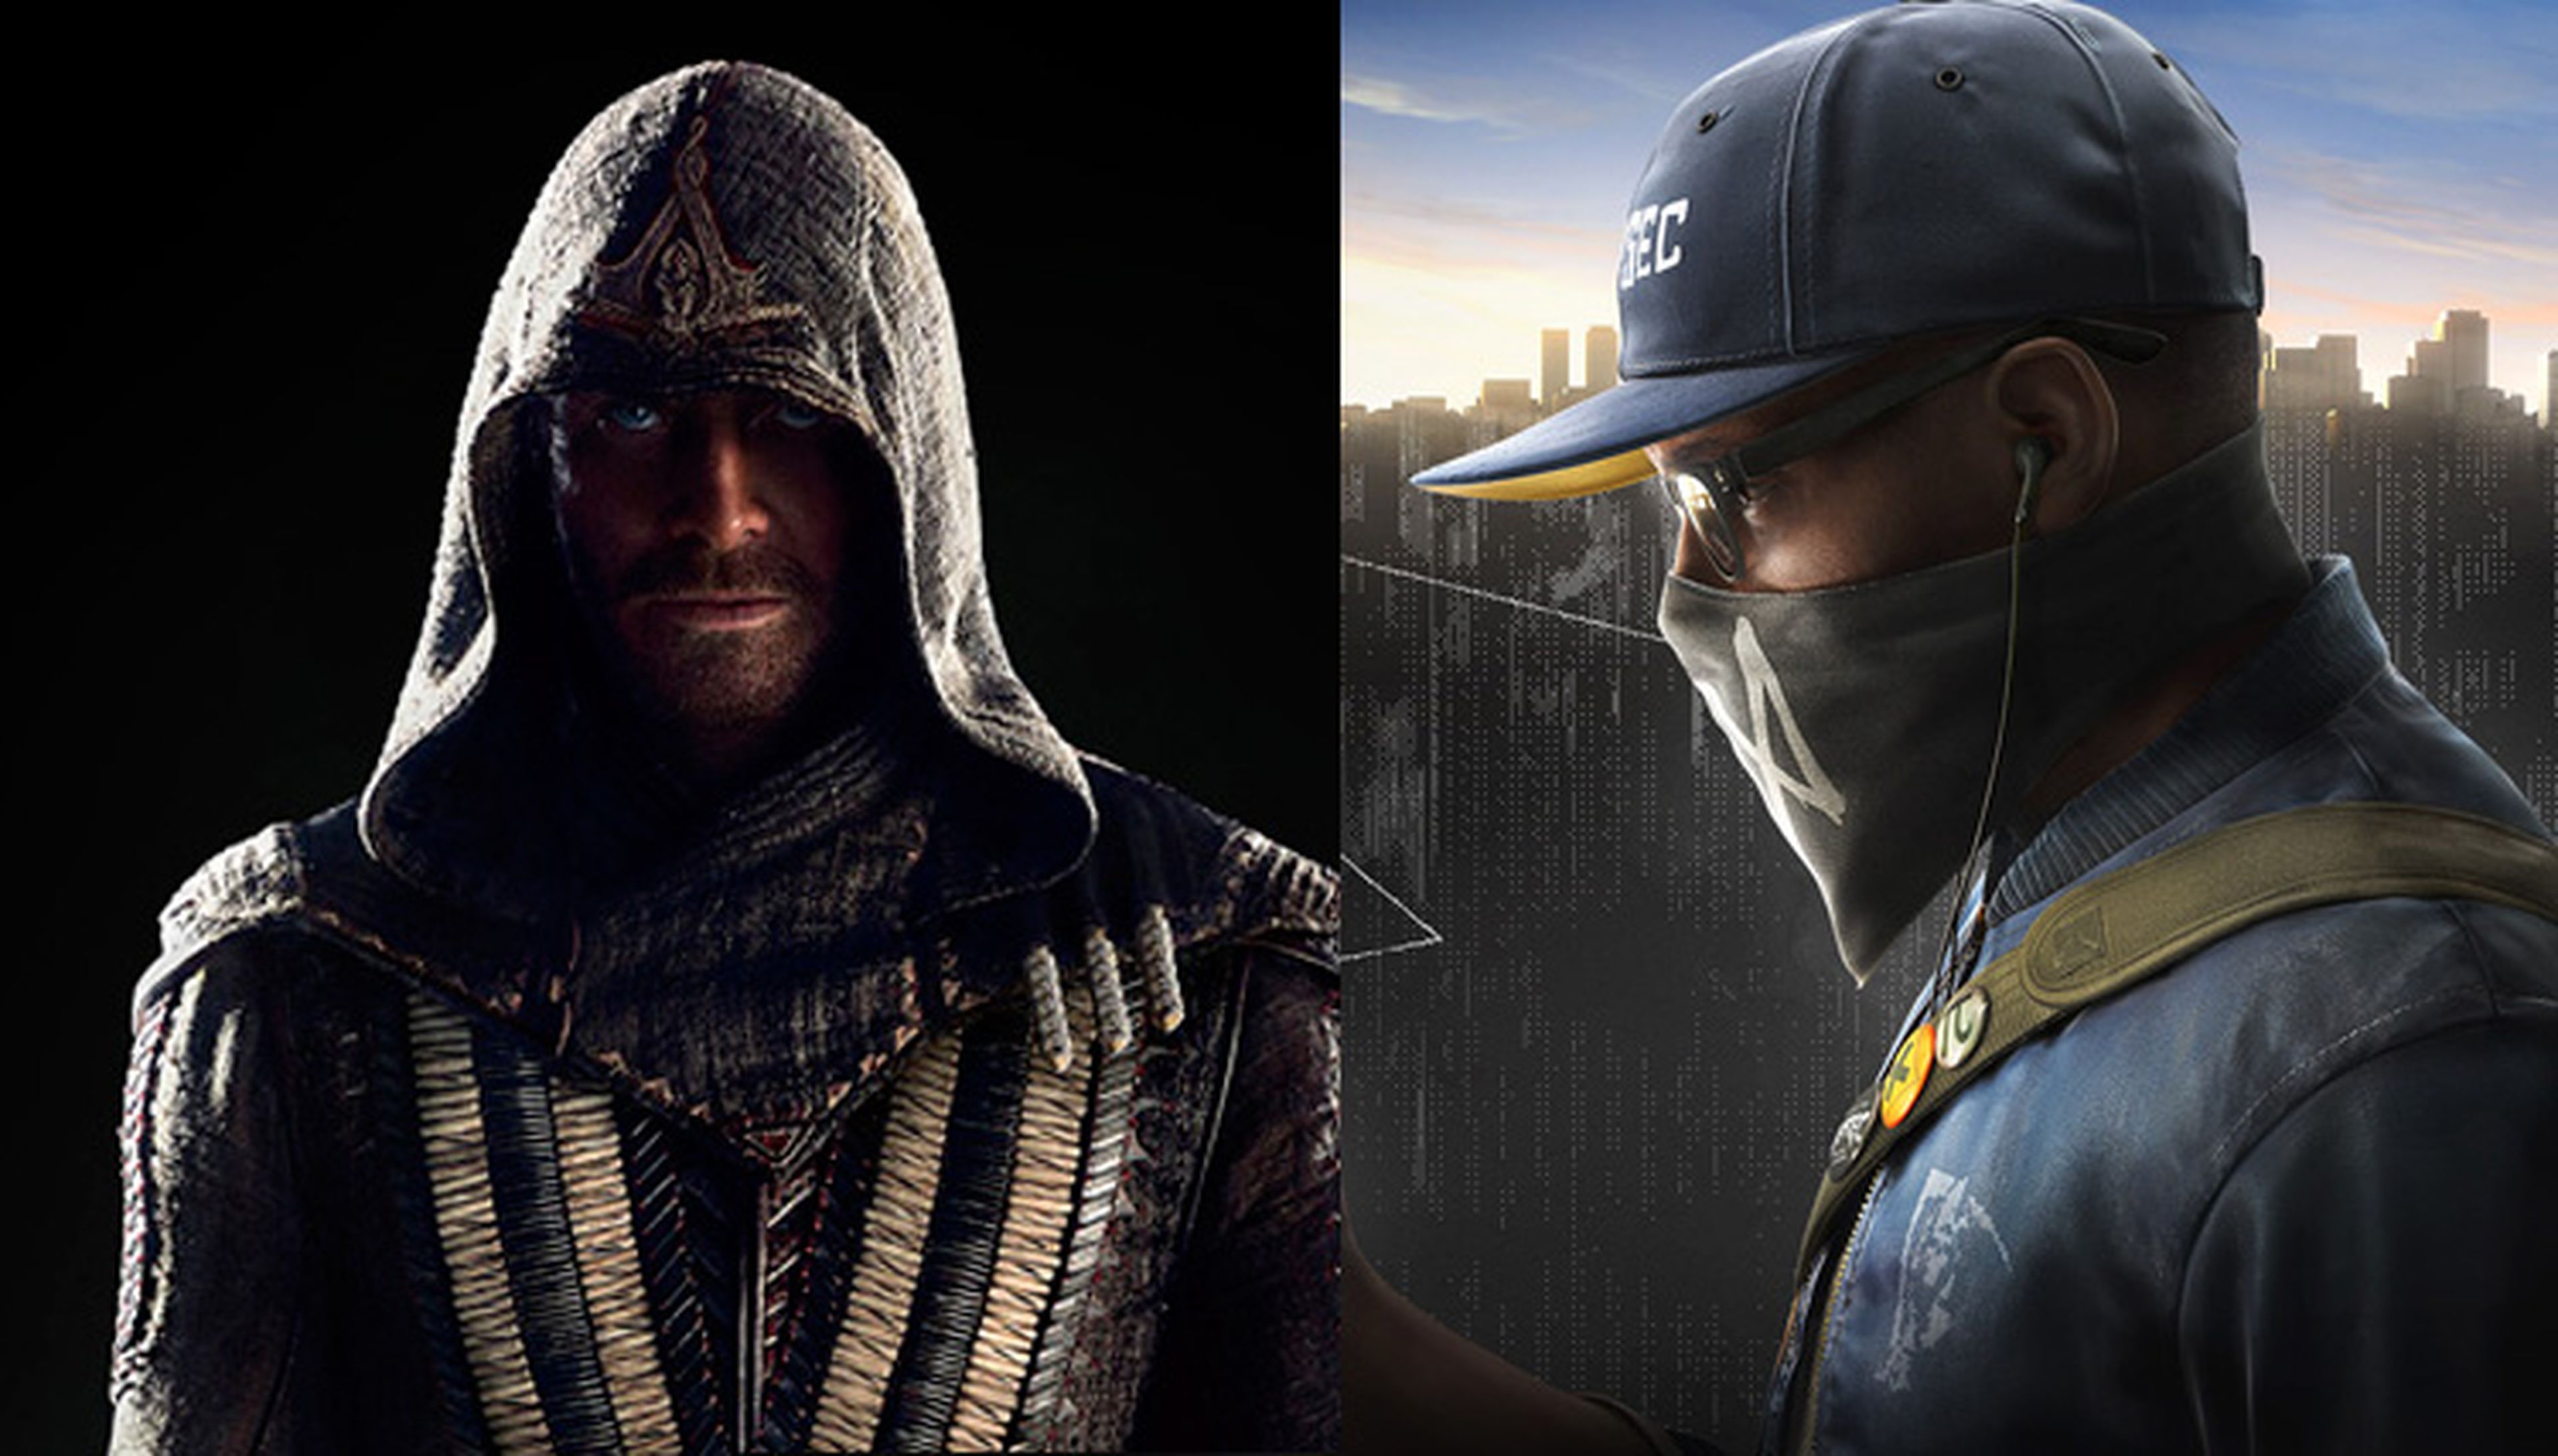 Assassin's Creed vs Watch Dogs 2